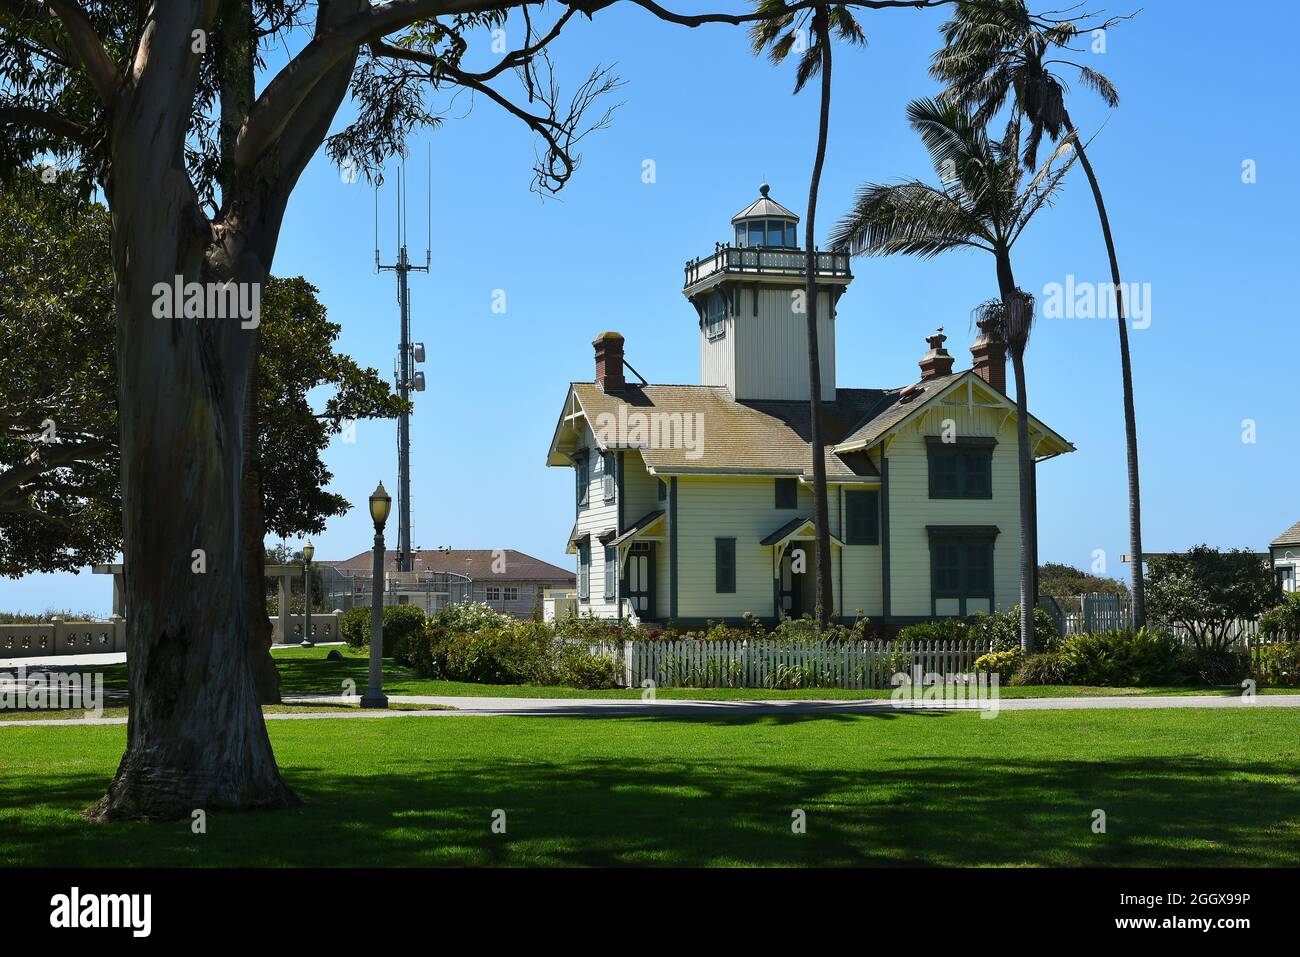 SAN PEDRO, CALIFORNIA - 27 AUG 2021: Point Fermin Lighthouse, framed by trees, is on the National Register of Historic Places. Stock Photo